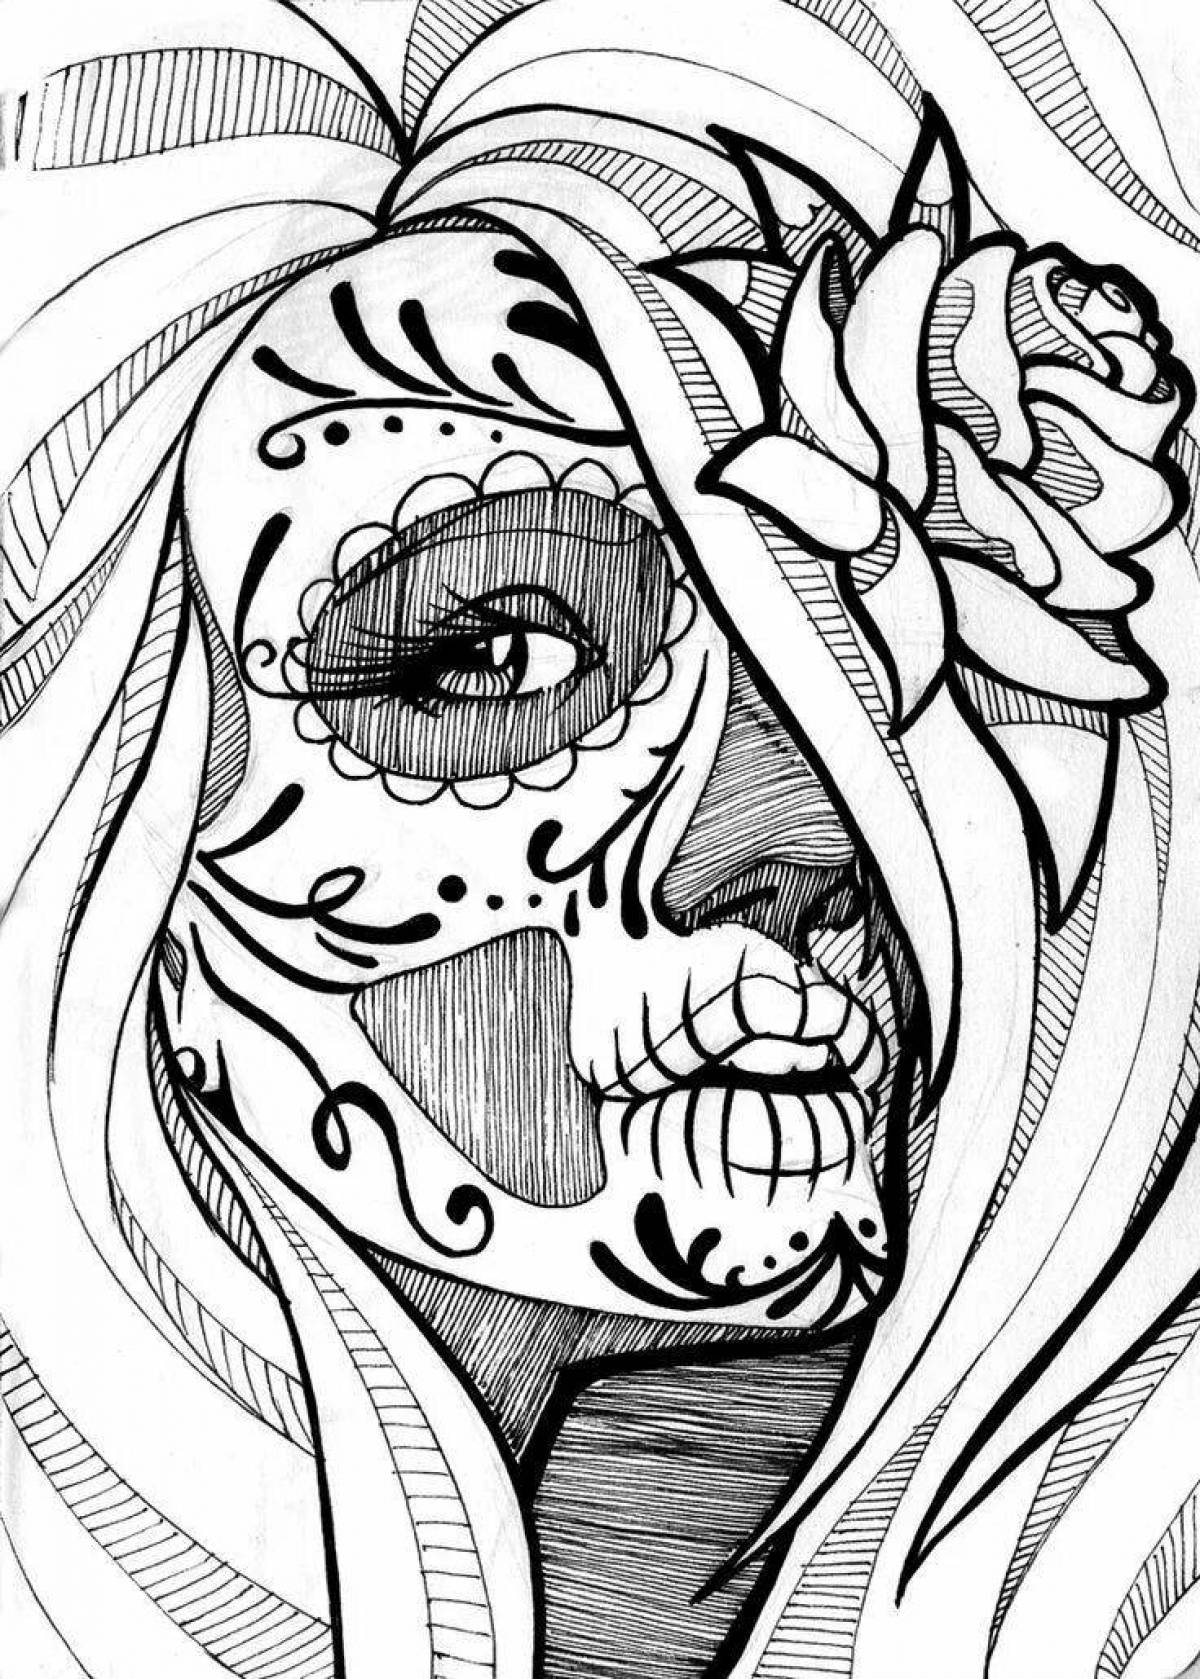 Coloring page is scary but beautiful: eerily beautiful